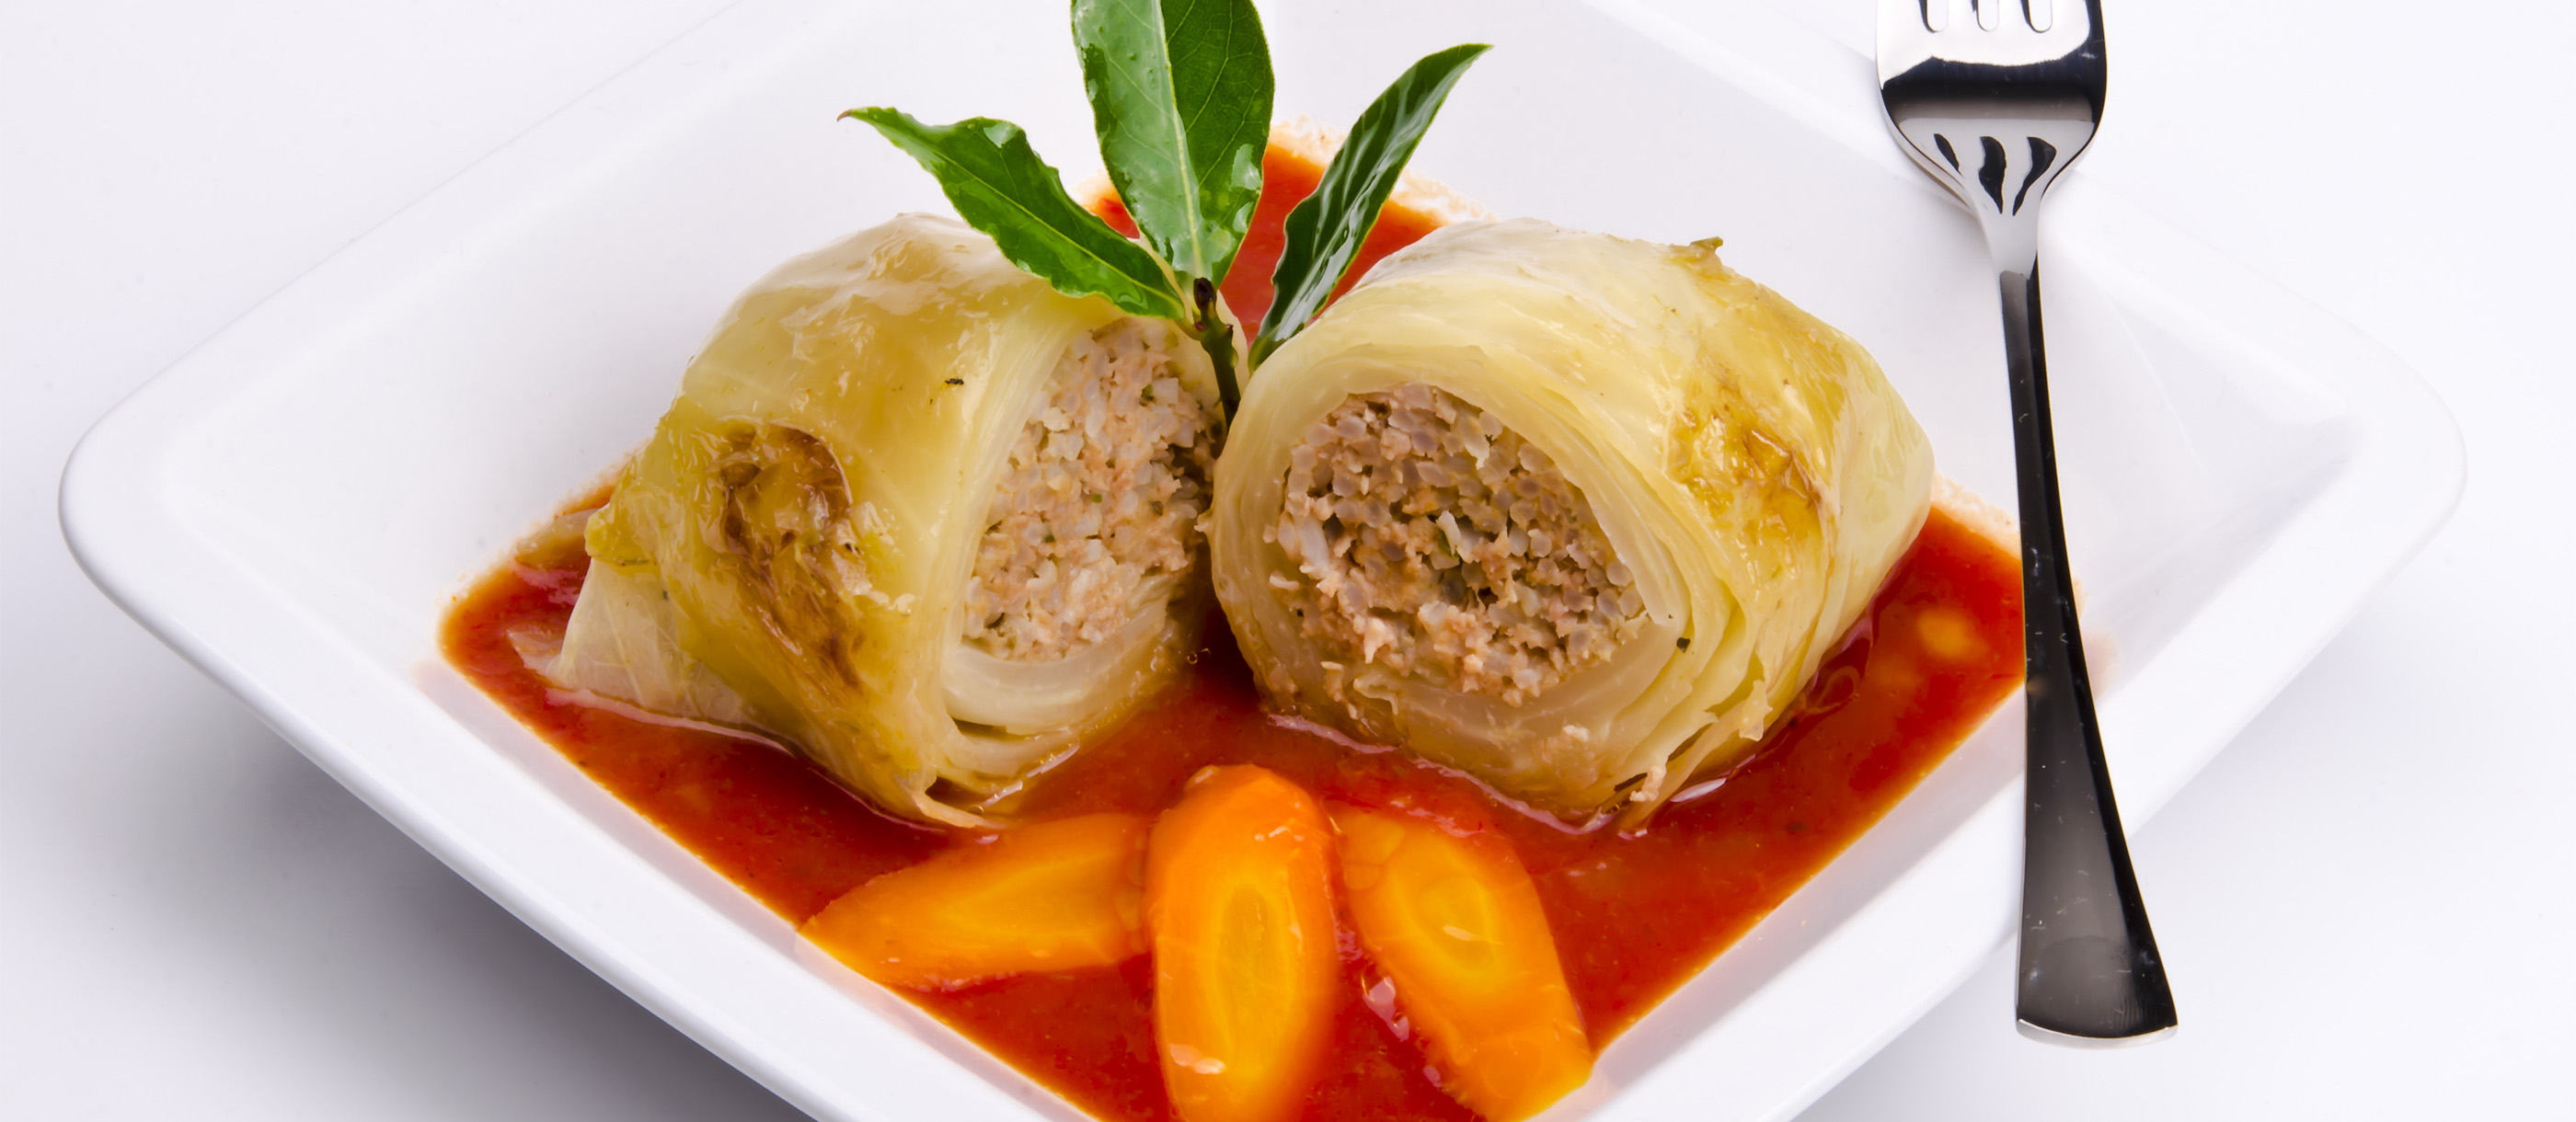 Kohlroulade | Traditional Ground Meat Dish From Germany